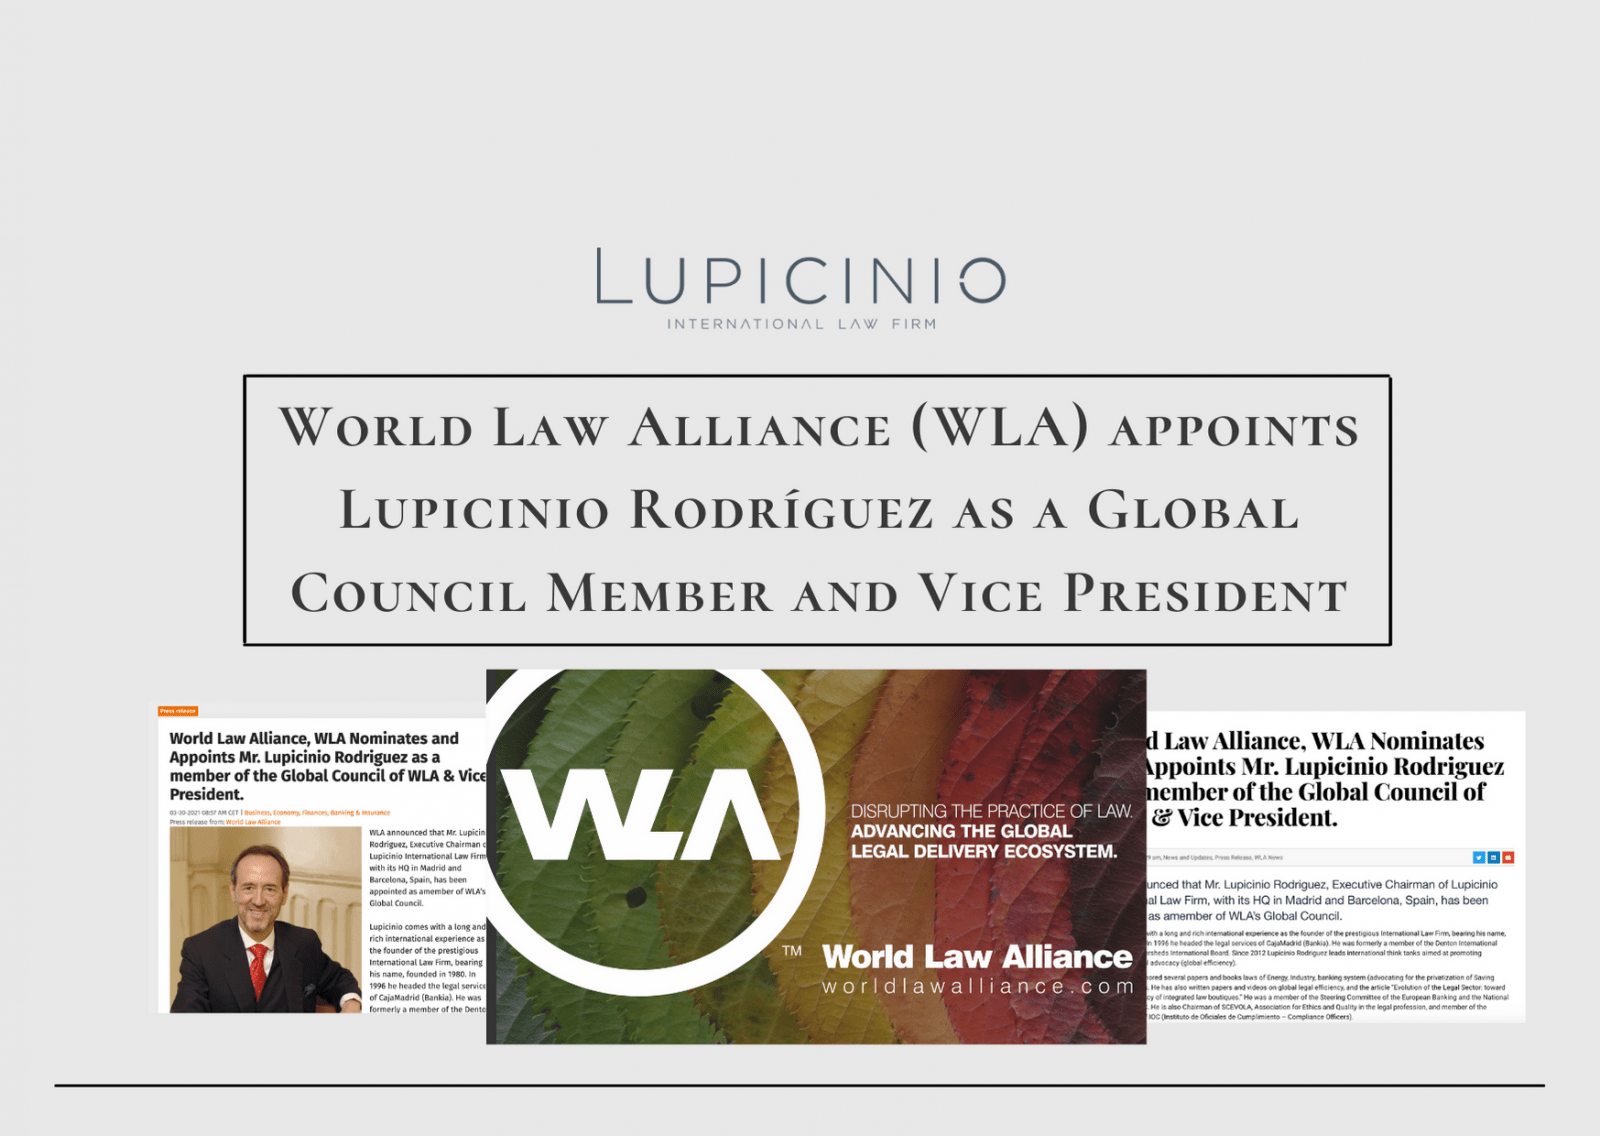 World Law Alliance (WLA) appoints Lupicinio Rodriguez as WLA Global Council Member and Vice President.